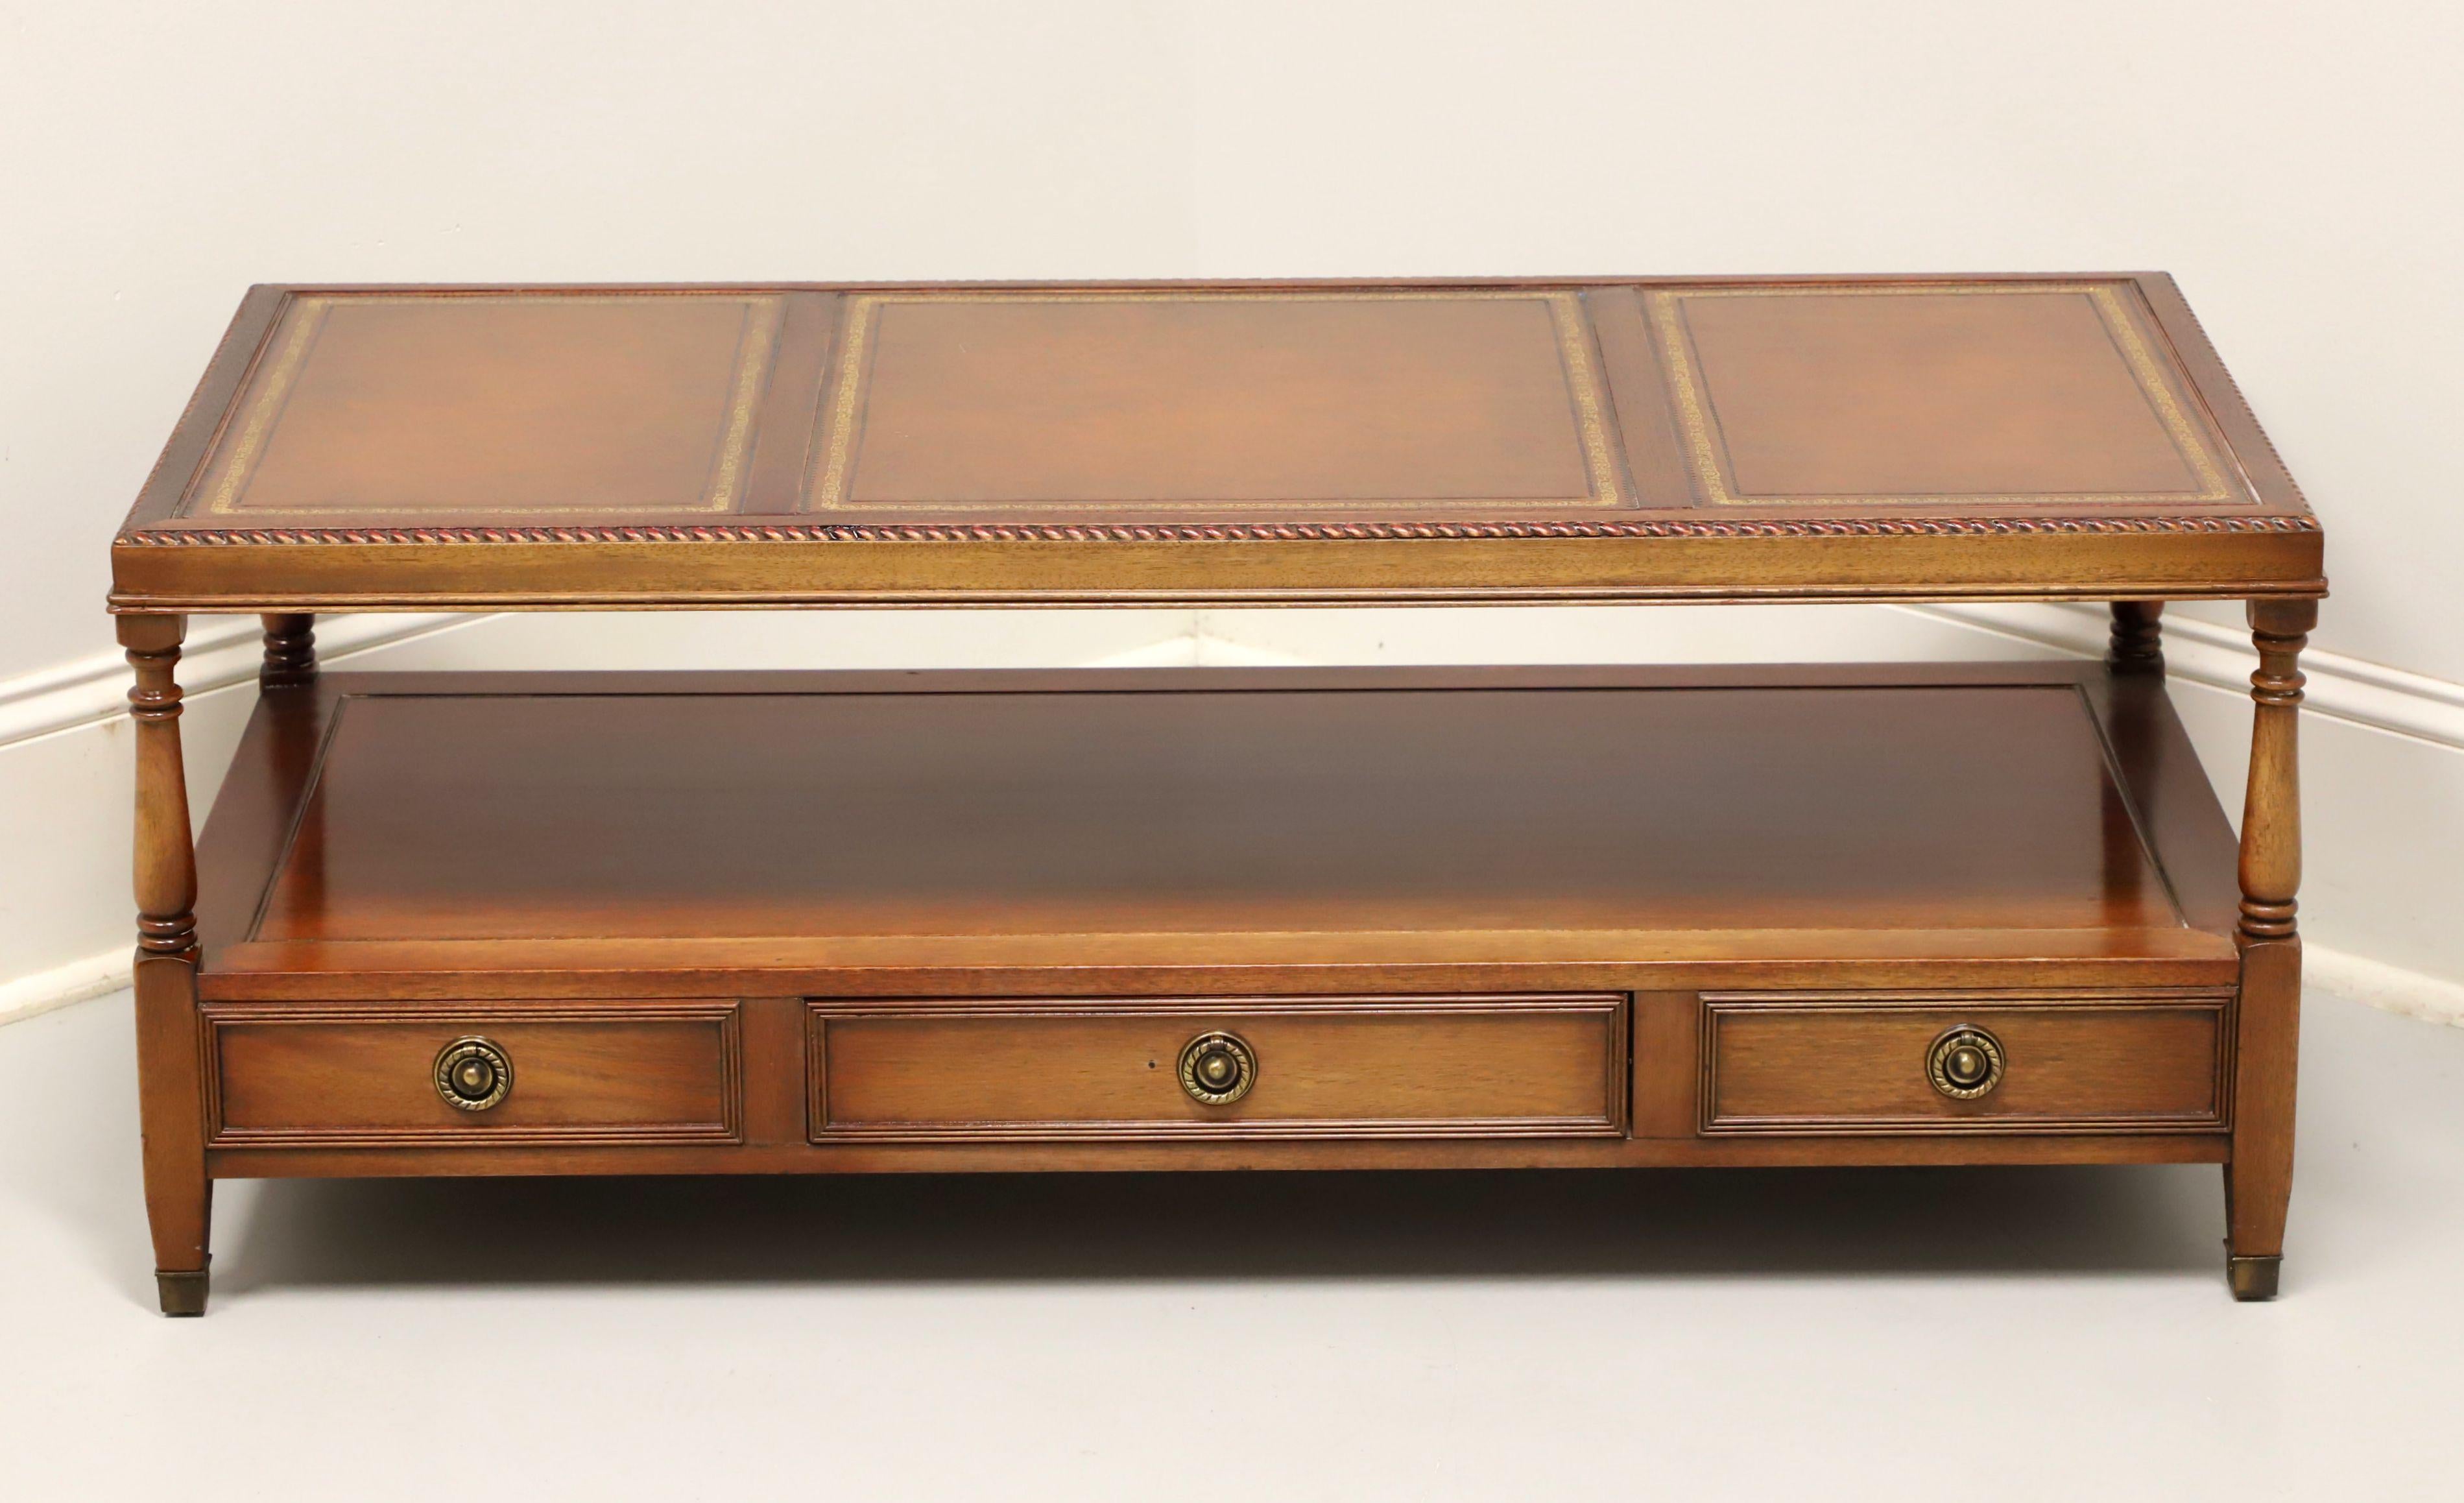 A Federal style rectangular coffee table by Gordon's Furniture, of Johnson City, Tennessee, USA. Mahogany with brass hardware, three panel inlaid embossed leather top, gadroon edge, turned corner posts, an undertier shelf with drawer and brass toe